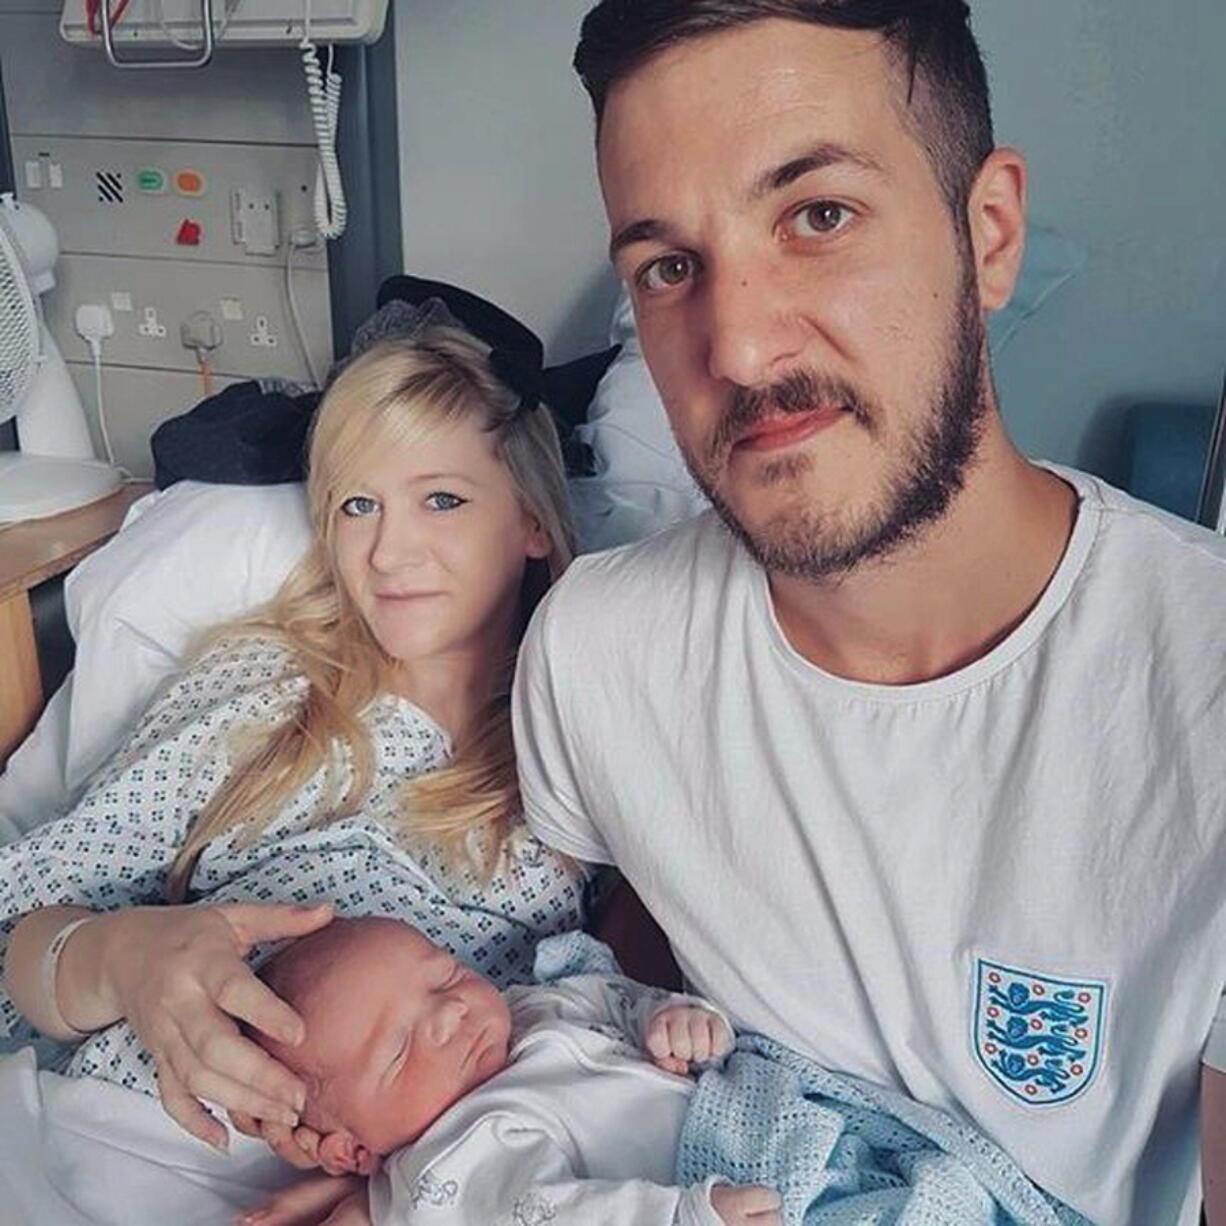 This is an undated hand out photo of Chris Gard and Connie Yates with their son Charlie Gard provided by the family, at Great Ormond Street Hospital, in London. The president of the United States has offered to help. The pope is willing to have the Vatican hospital take him in. Some 1.3 million pounds ($1.68 million) have been raised to help him leave Britain for treatment. But little has changed Tuesday July 4, 2017, for Charlie Gard, a terminally-ill British infant suffering from a rare genetic disease that has left him severely brain damaged.